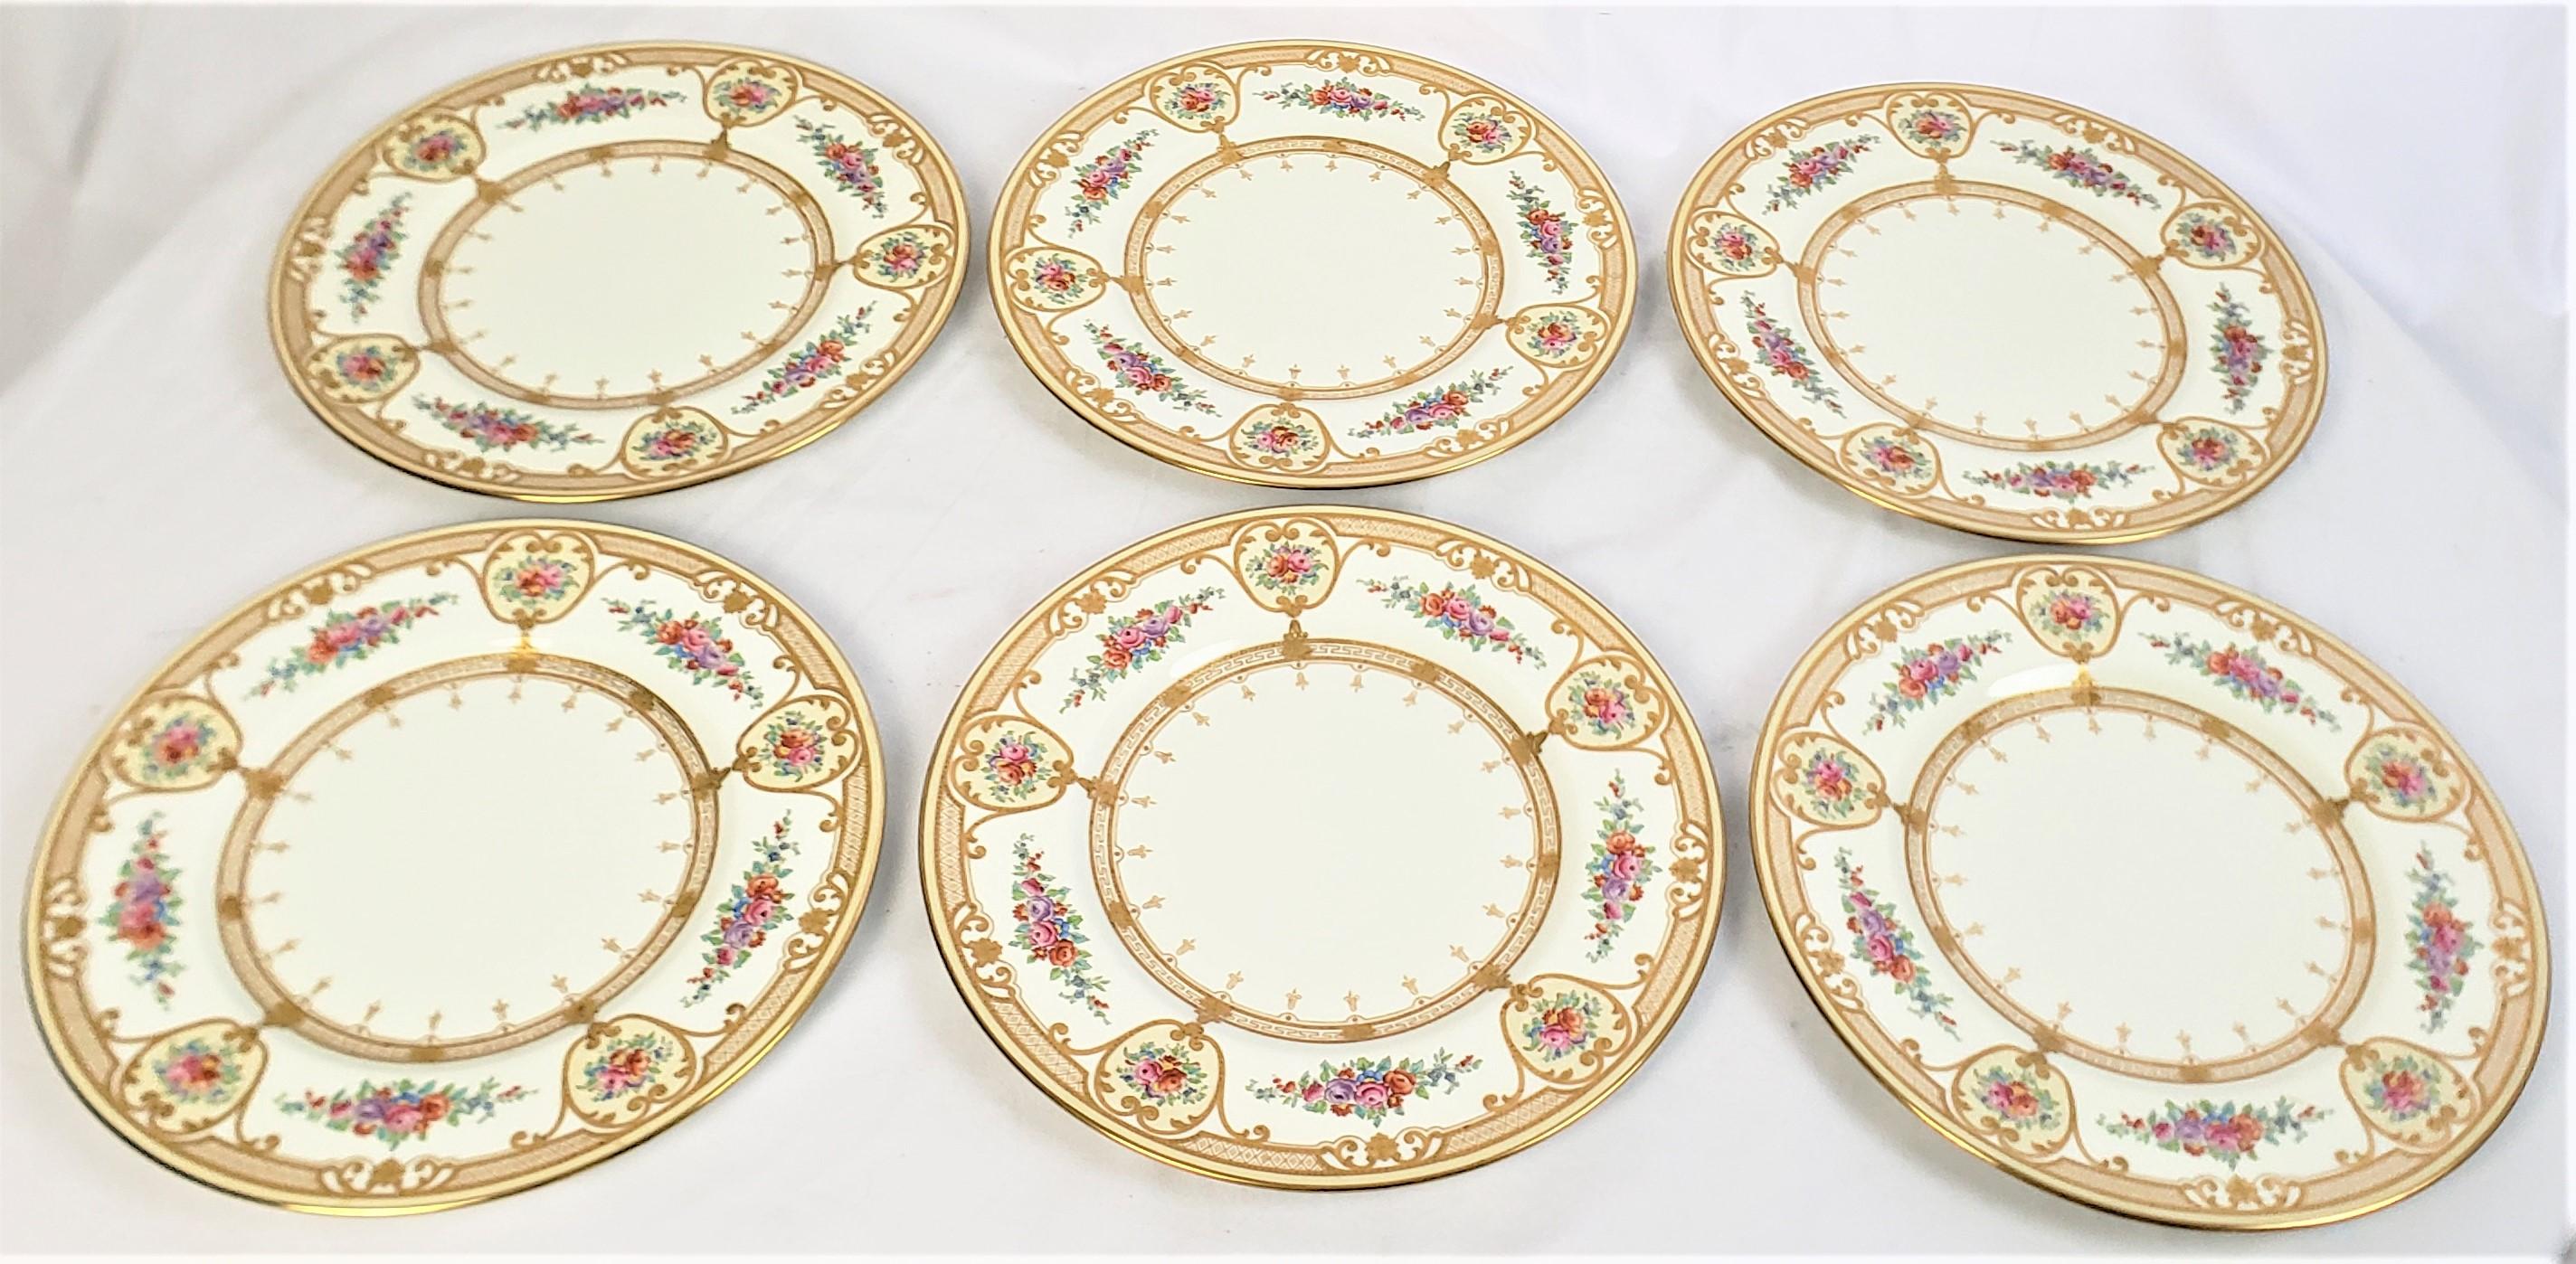 English Set of 12 Antique Wedgewood Dinner Plates with Heavy Gilt & Floral Decoration For Sale